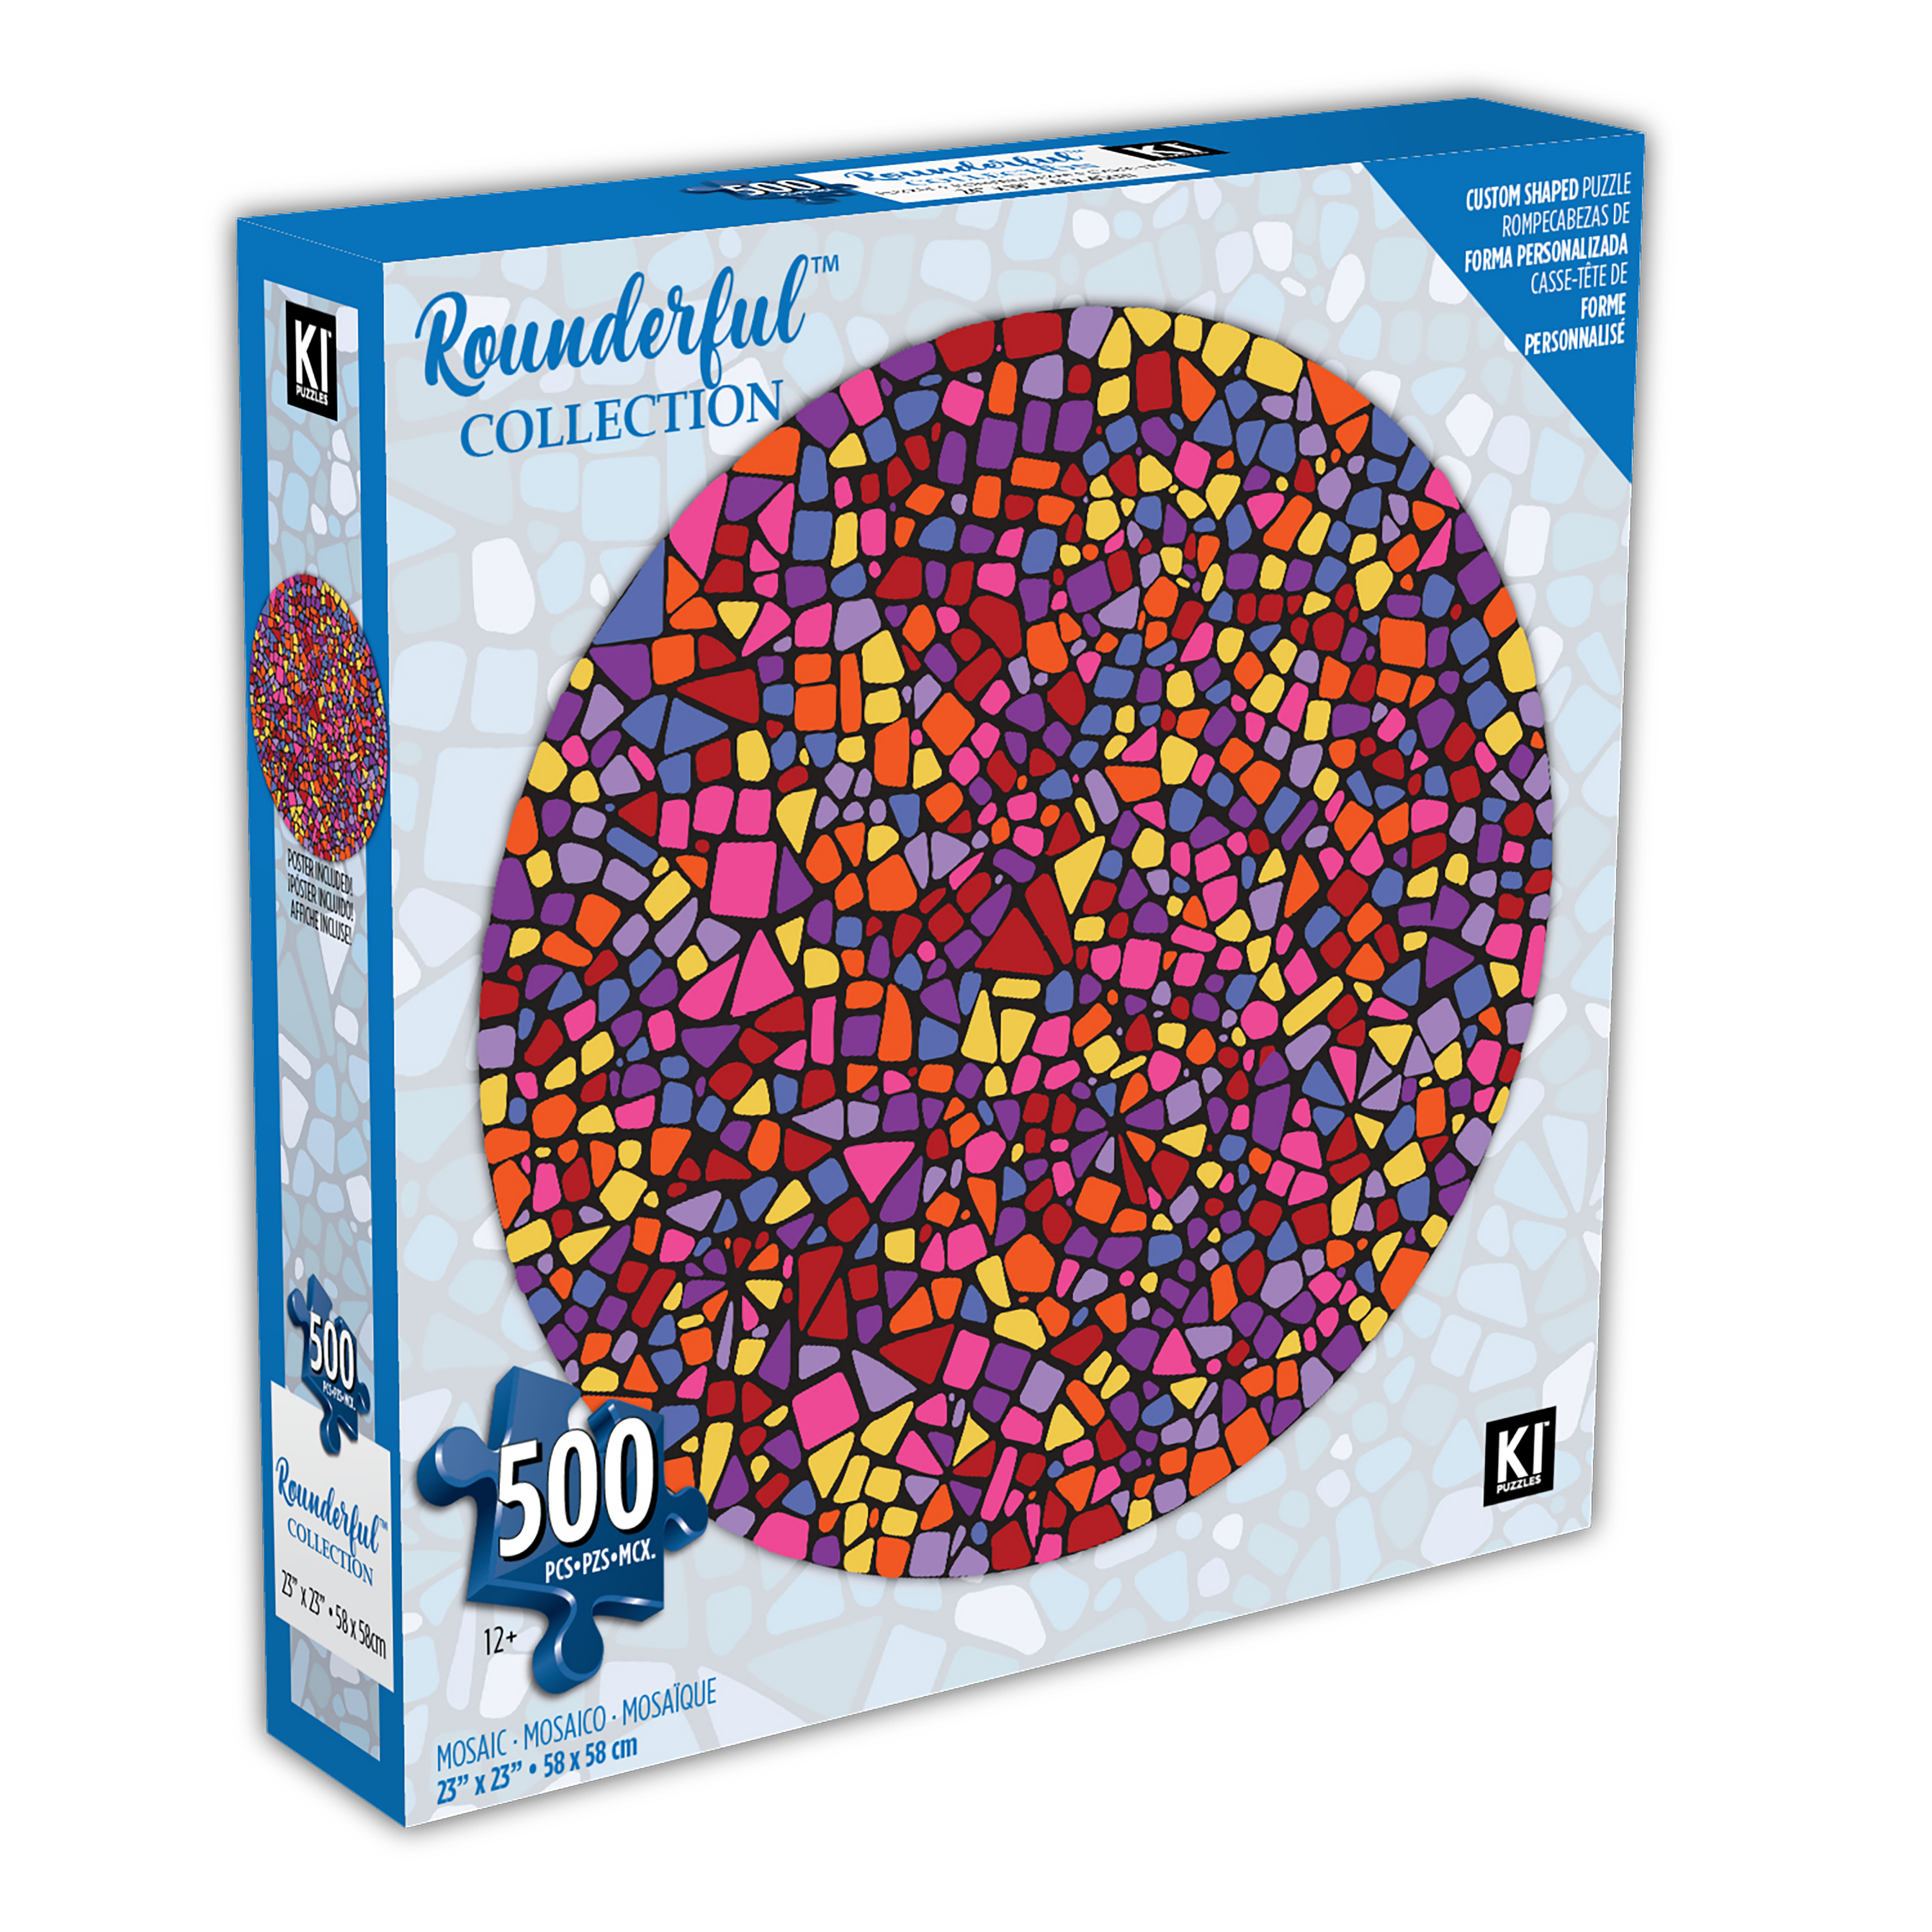 A Broader View Wild Animals Round Table Puzzle - 500 Pieces, Jigsaw Puzzles  For Adults & Kids, Suitable For Groups Of 2 Or More, Everyone Gets The